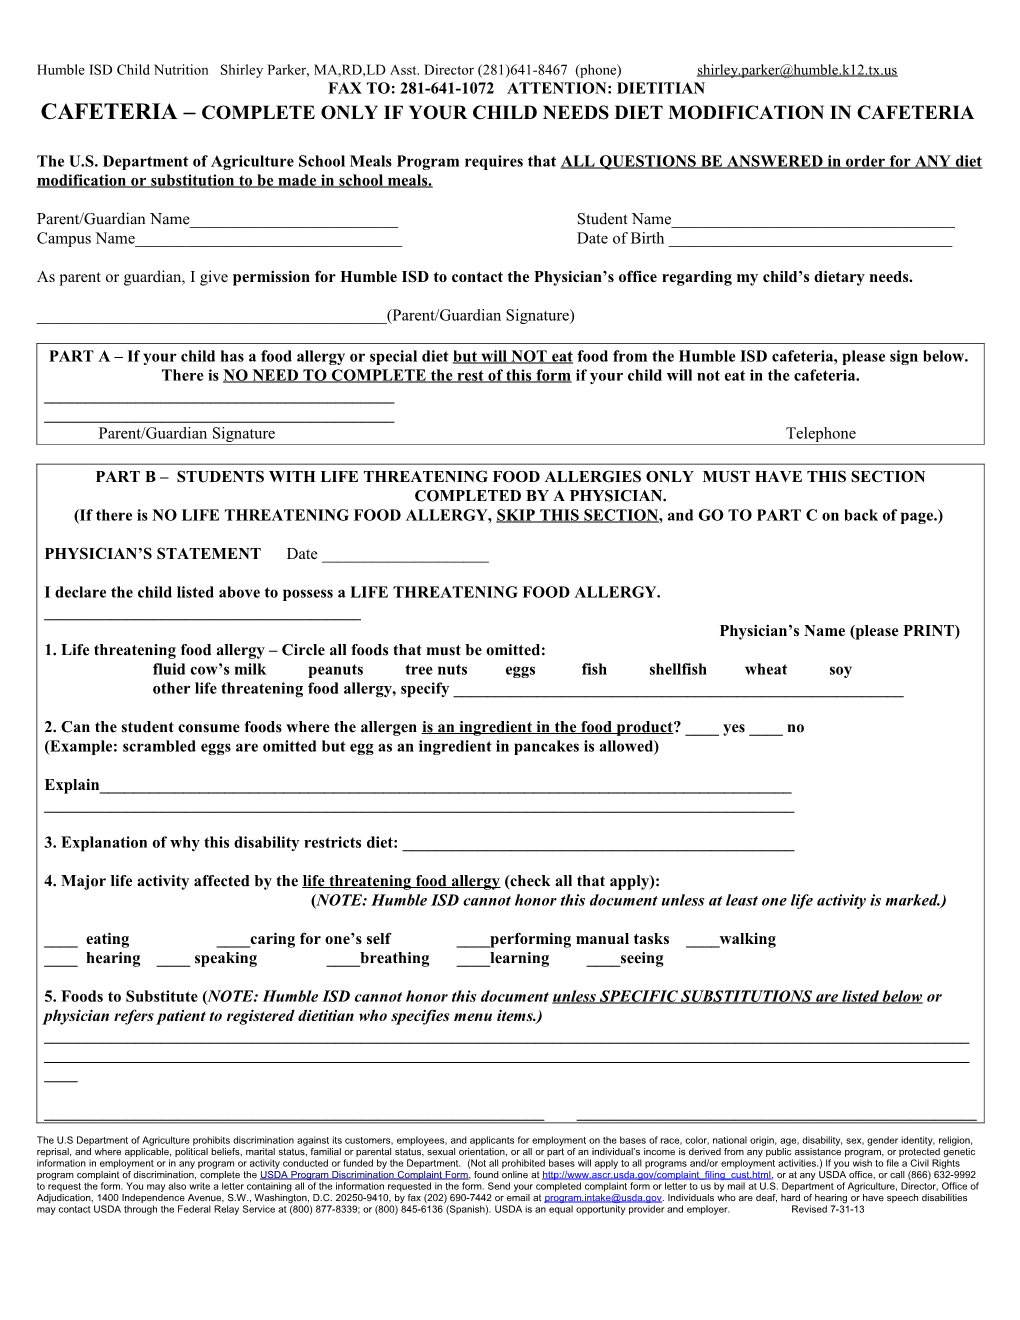 Please Use This Form for LIFE THREATENIG Food Allergies Only